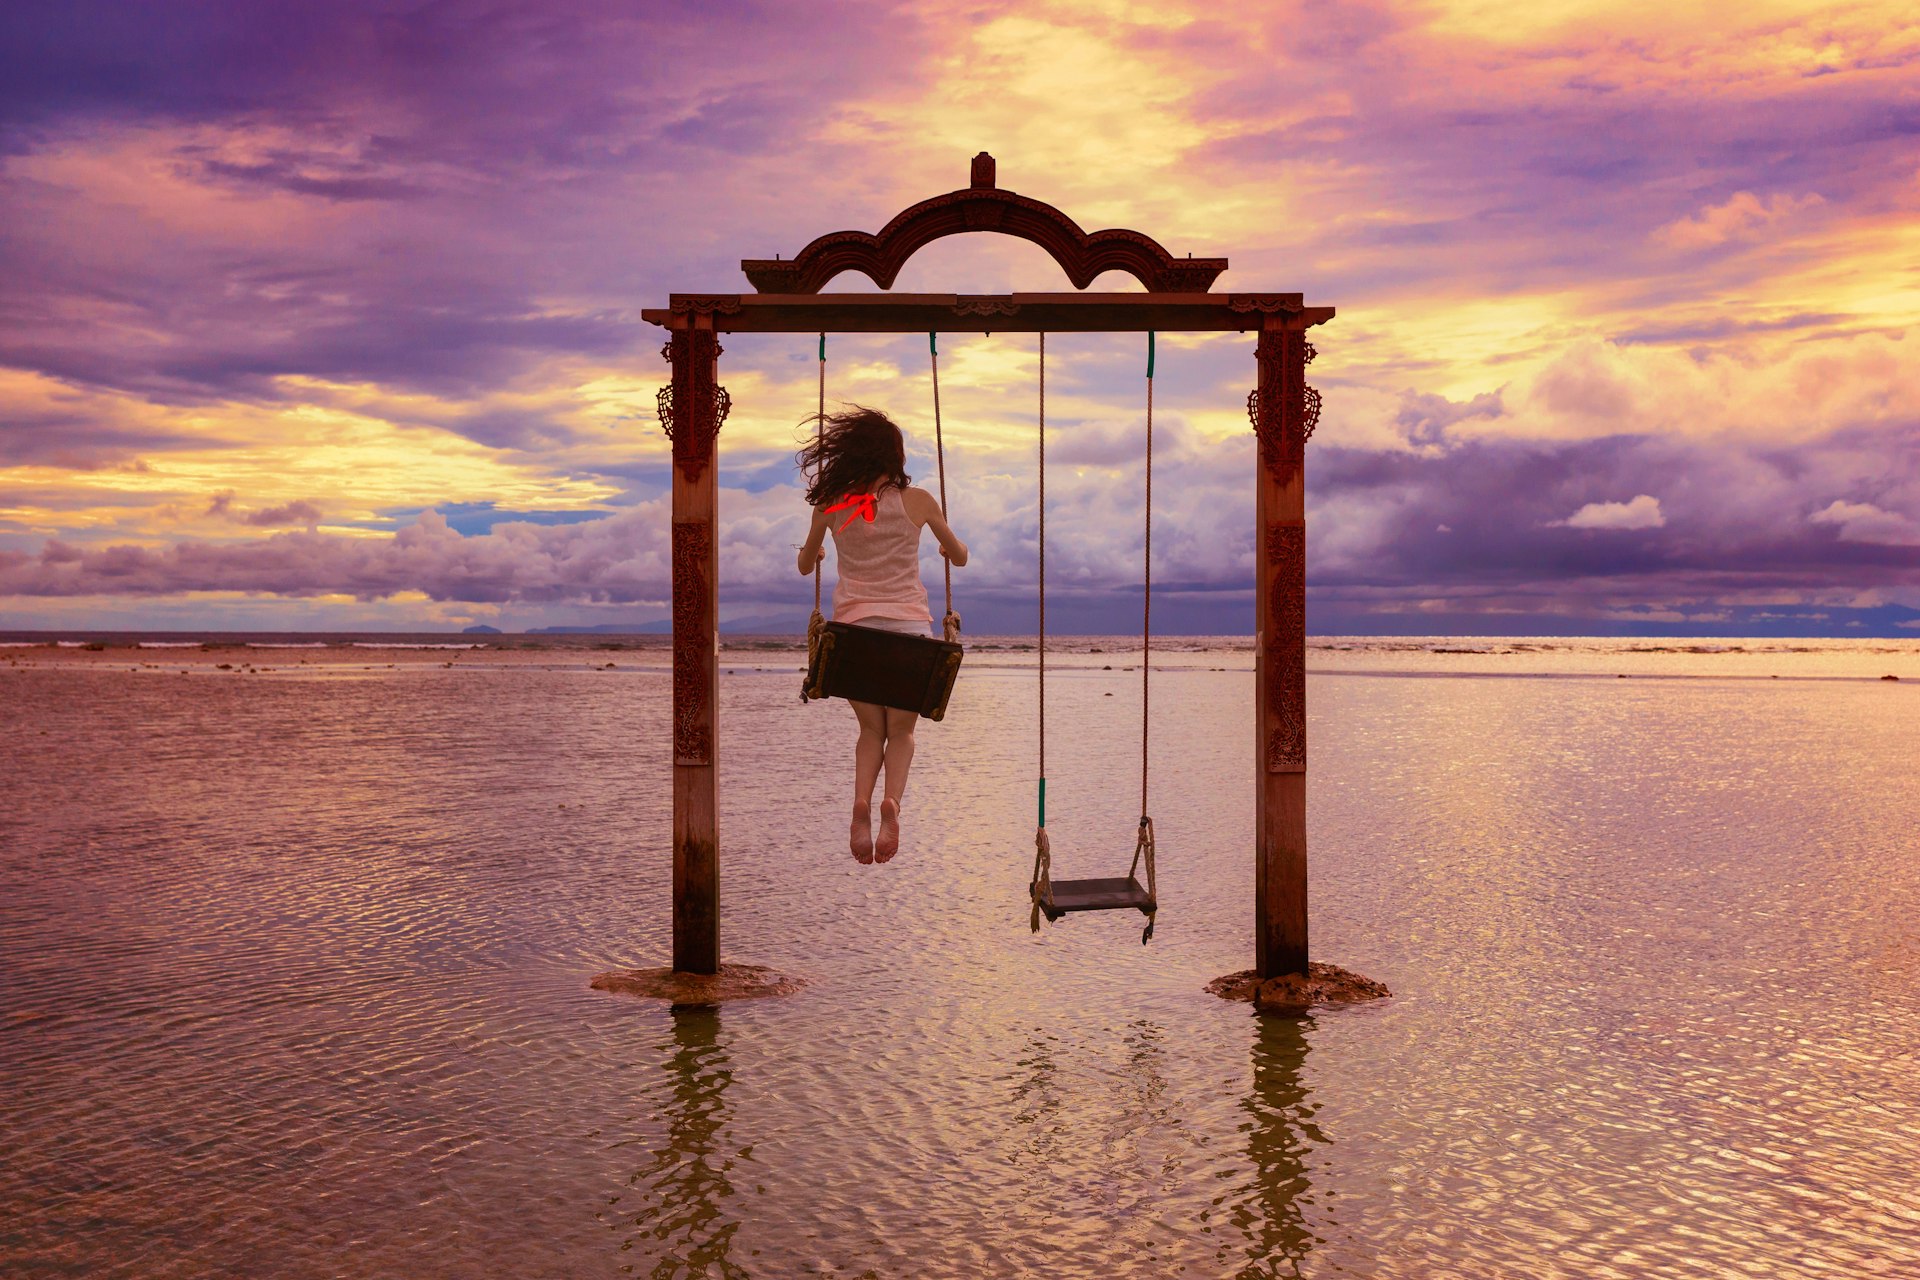 A woman swings high on a swing set in the shallows of the ocean. The sun is setting casting a pink hue across the sky